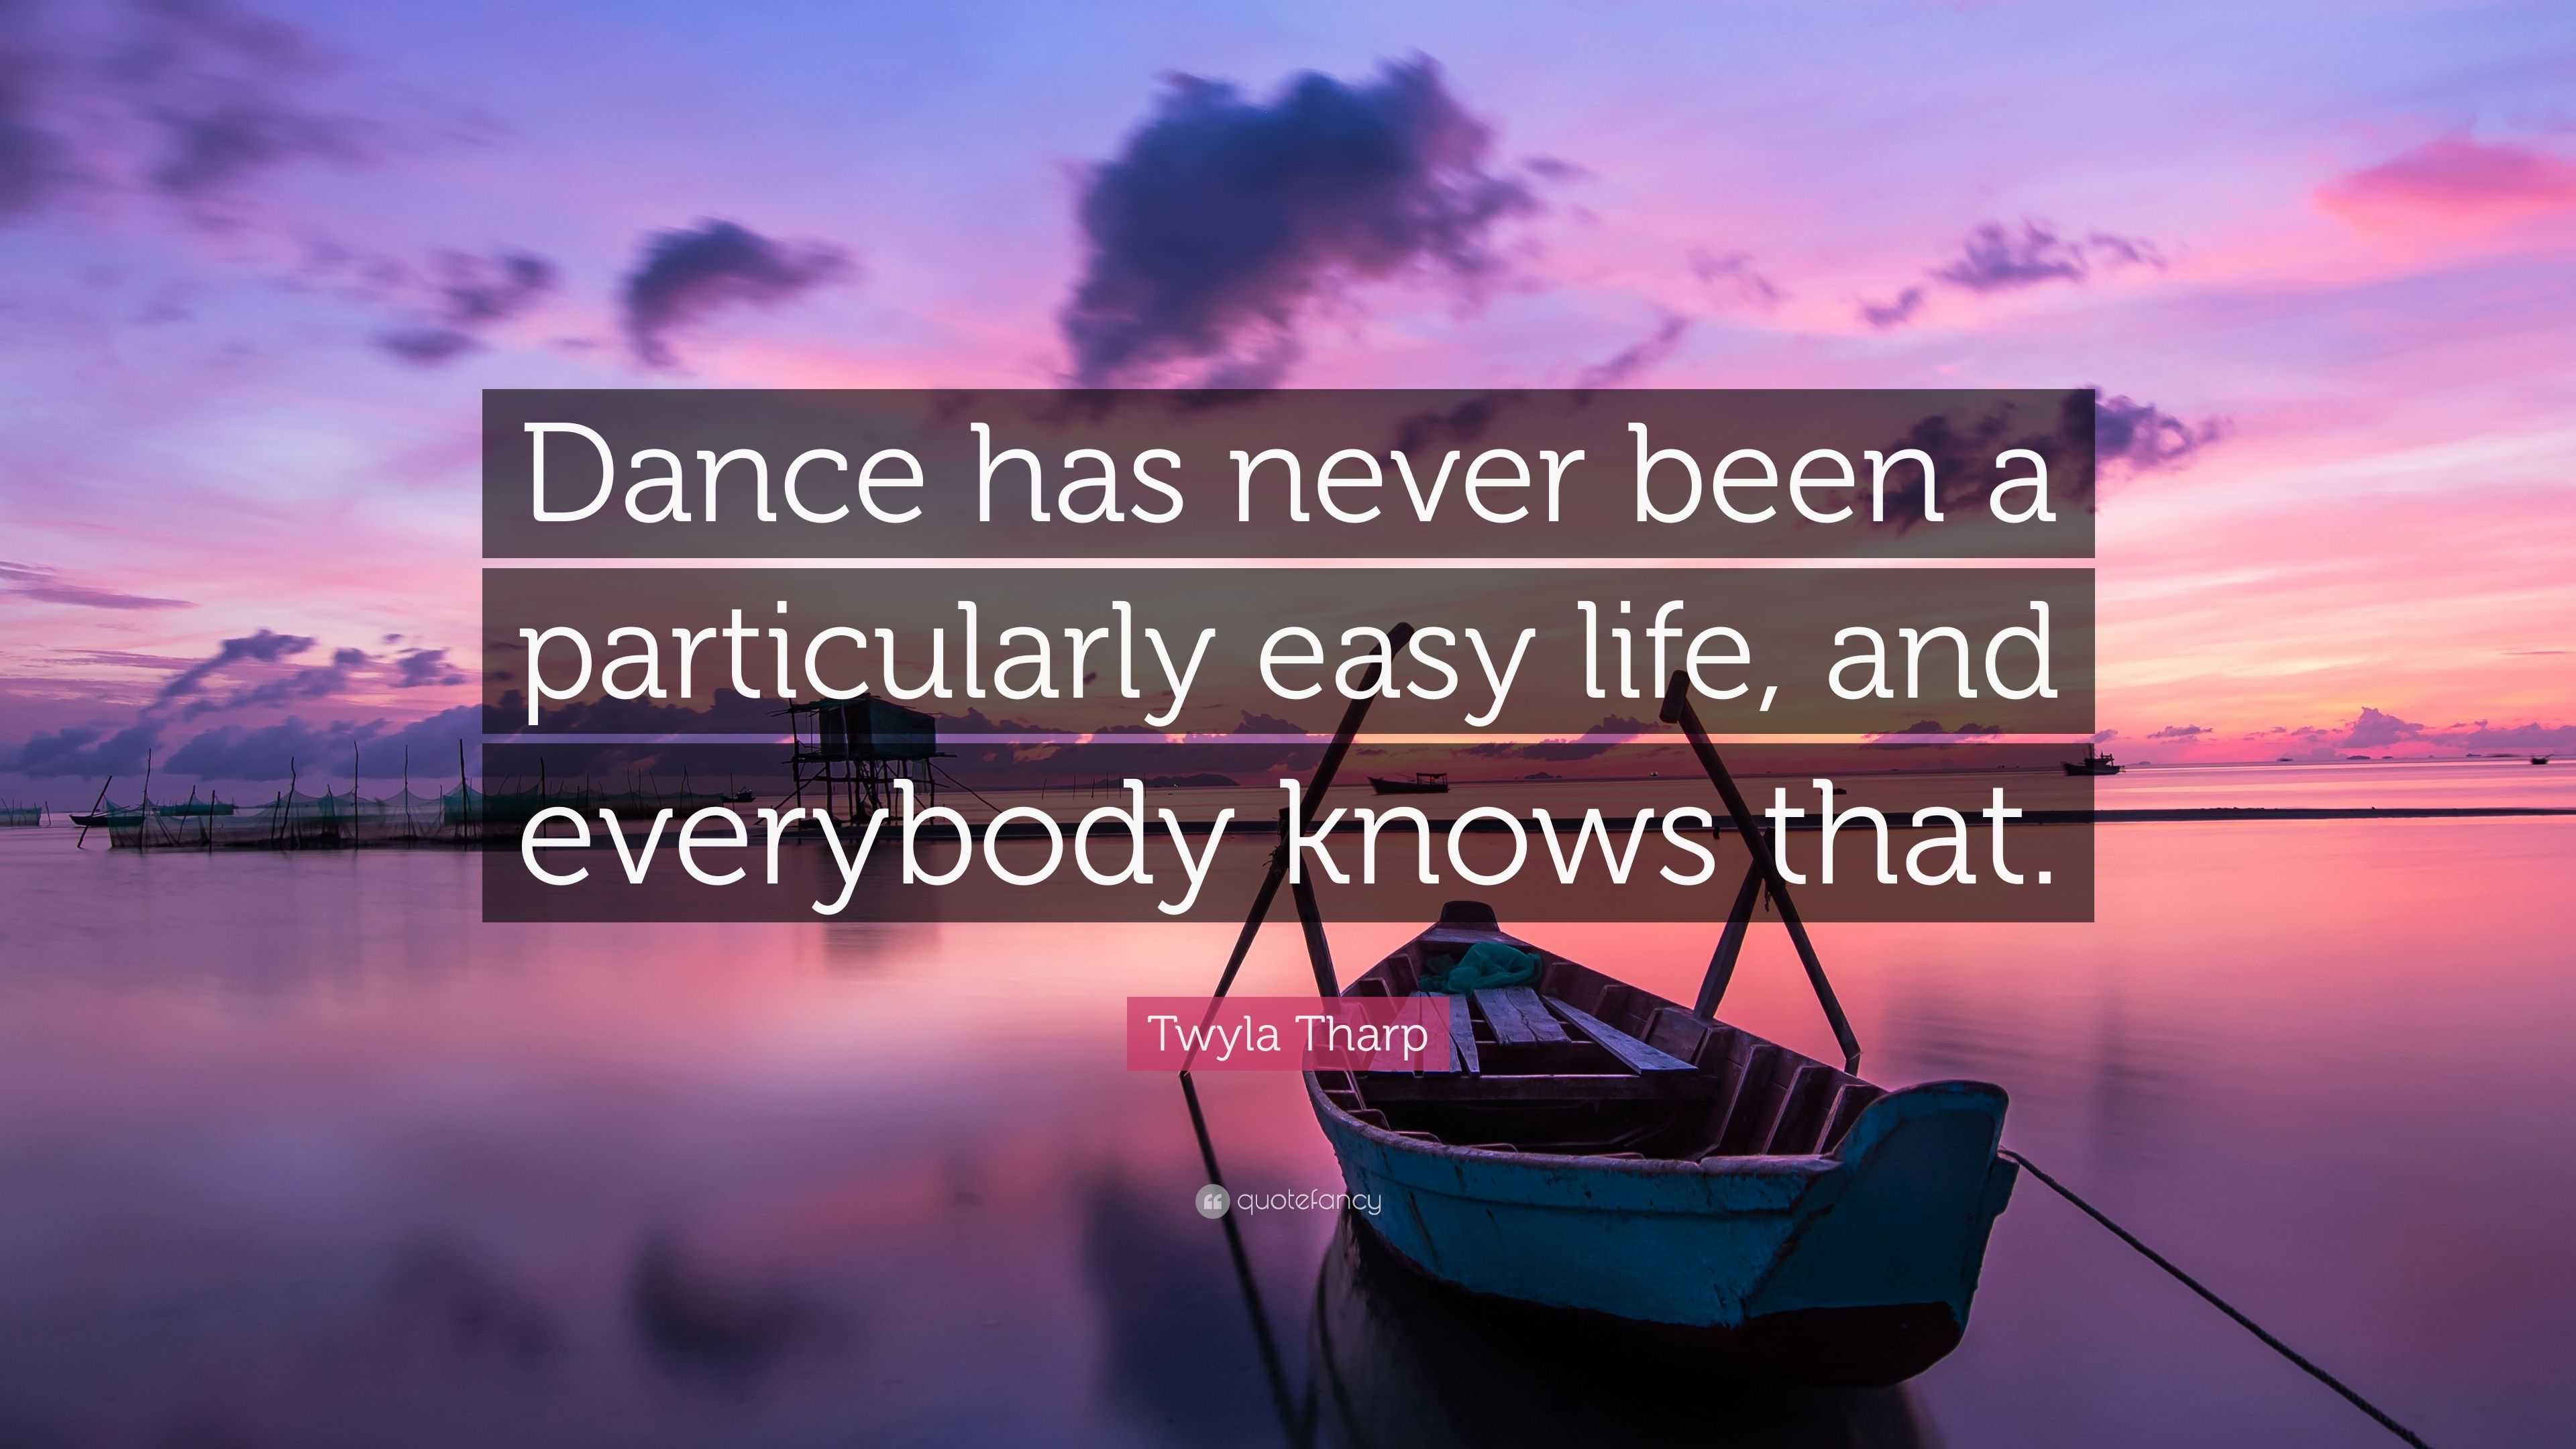 Twyla Tharp Quote: “Dance has never been a particularly easy life, and ...